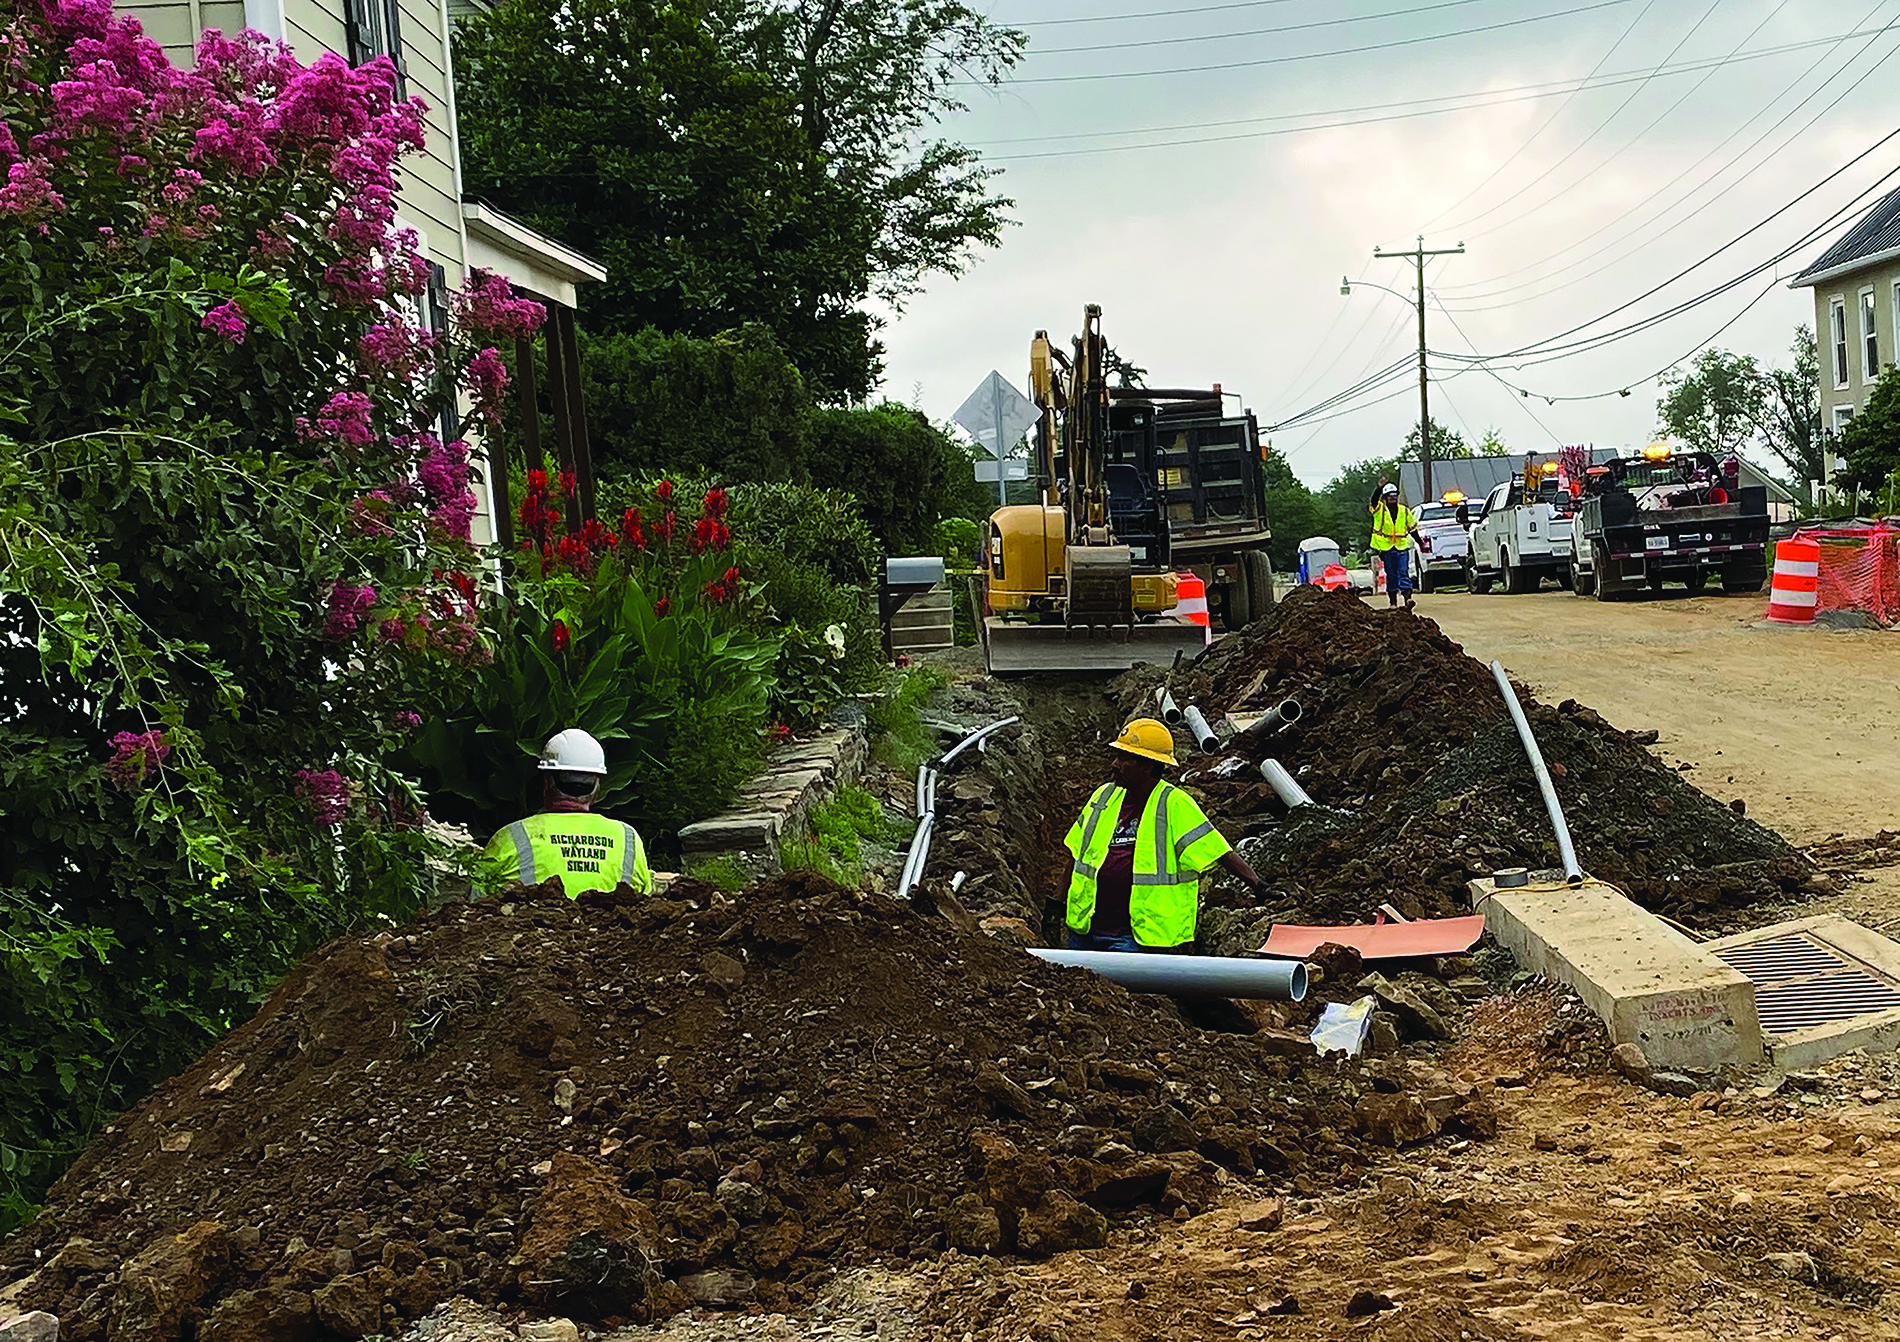 Workers in a trench outside a home and garden. Image by Town of Hillsboro.